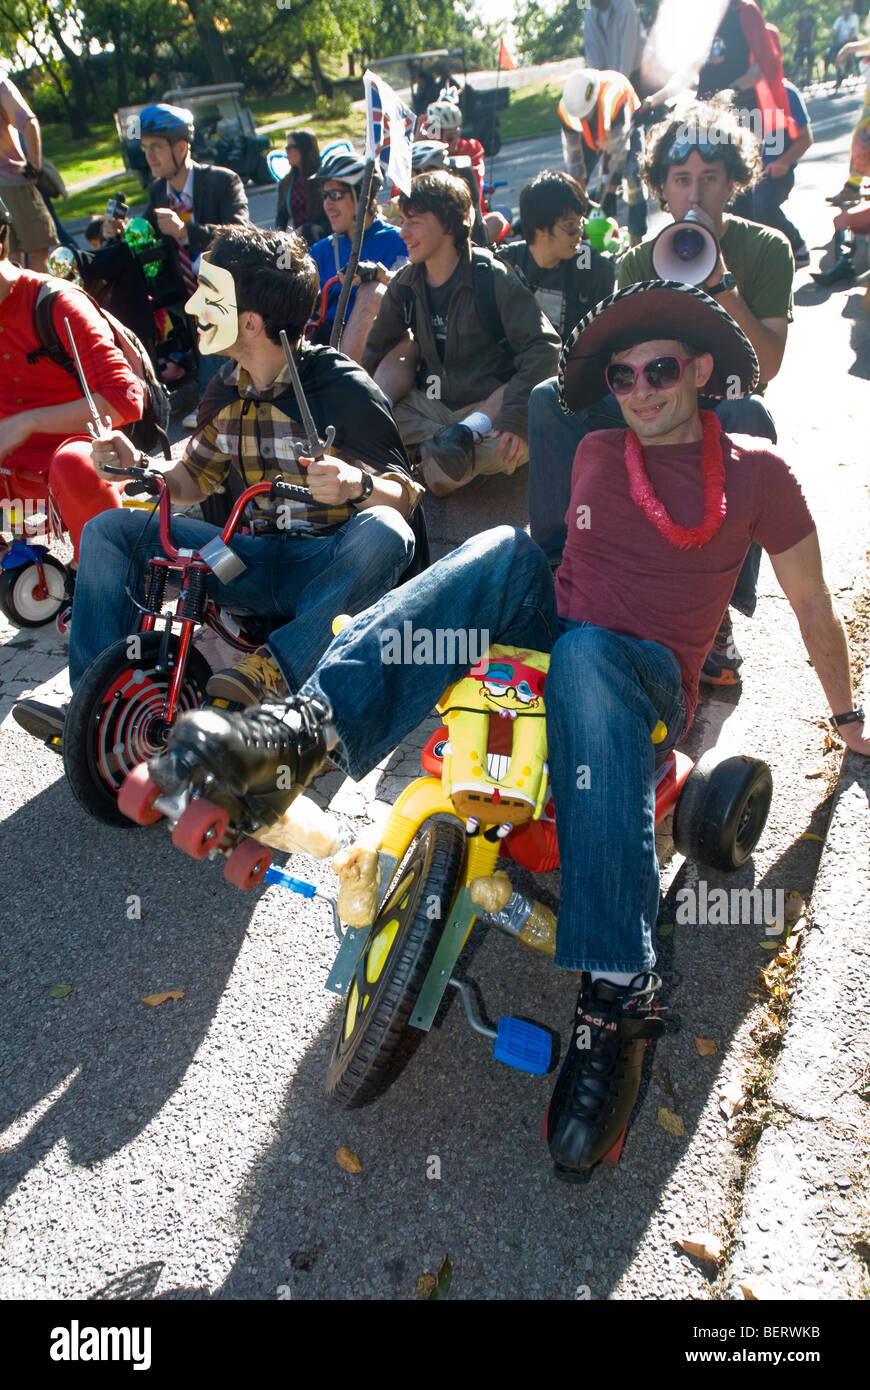 Participants in the 2nd Big Wheel Race in Central Park dangerously hurdle down hills in New York Stock Photo